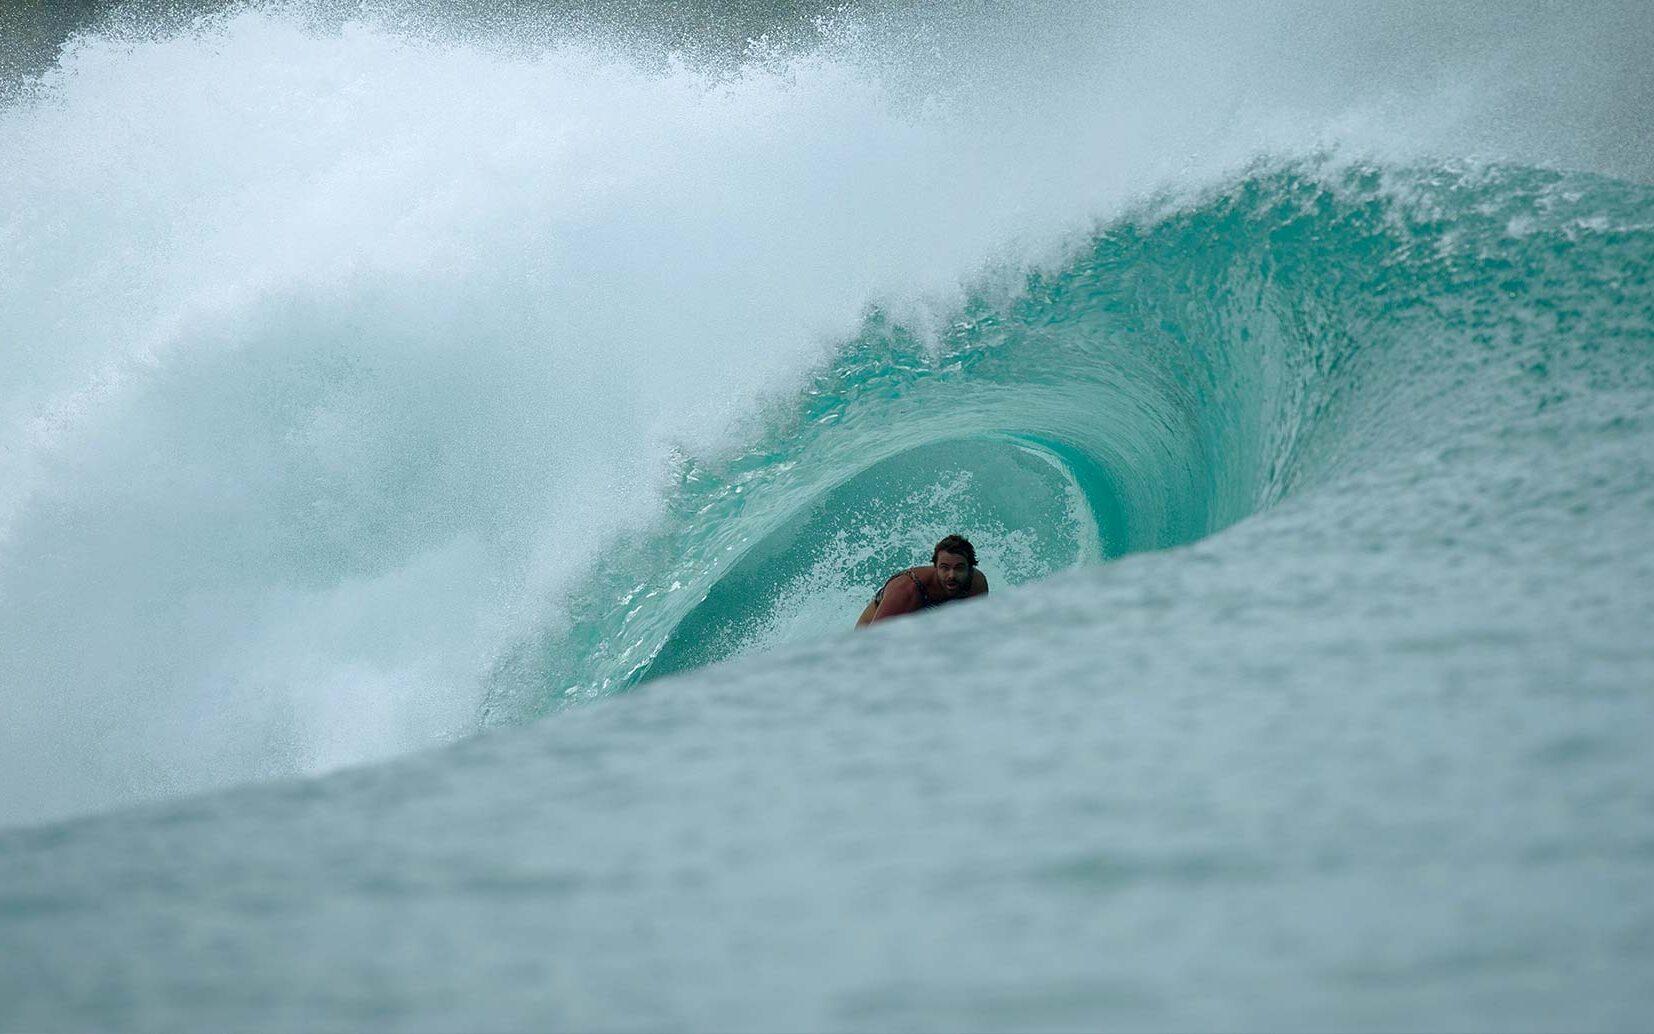 Surfer catching a perfect barrel at Ebay in the Mentawai Islands